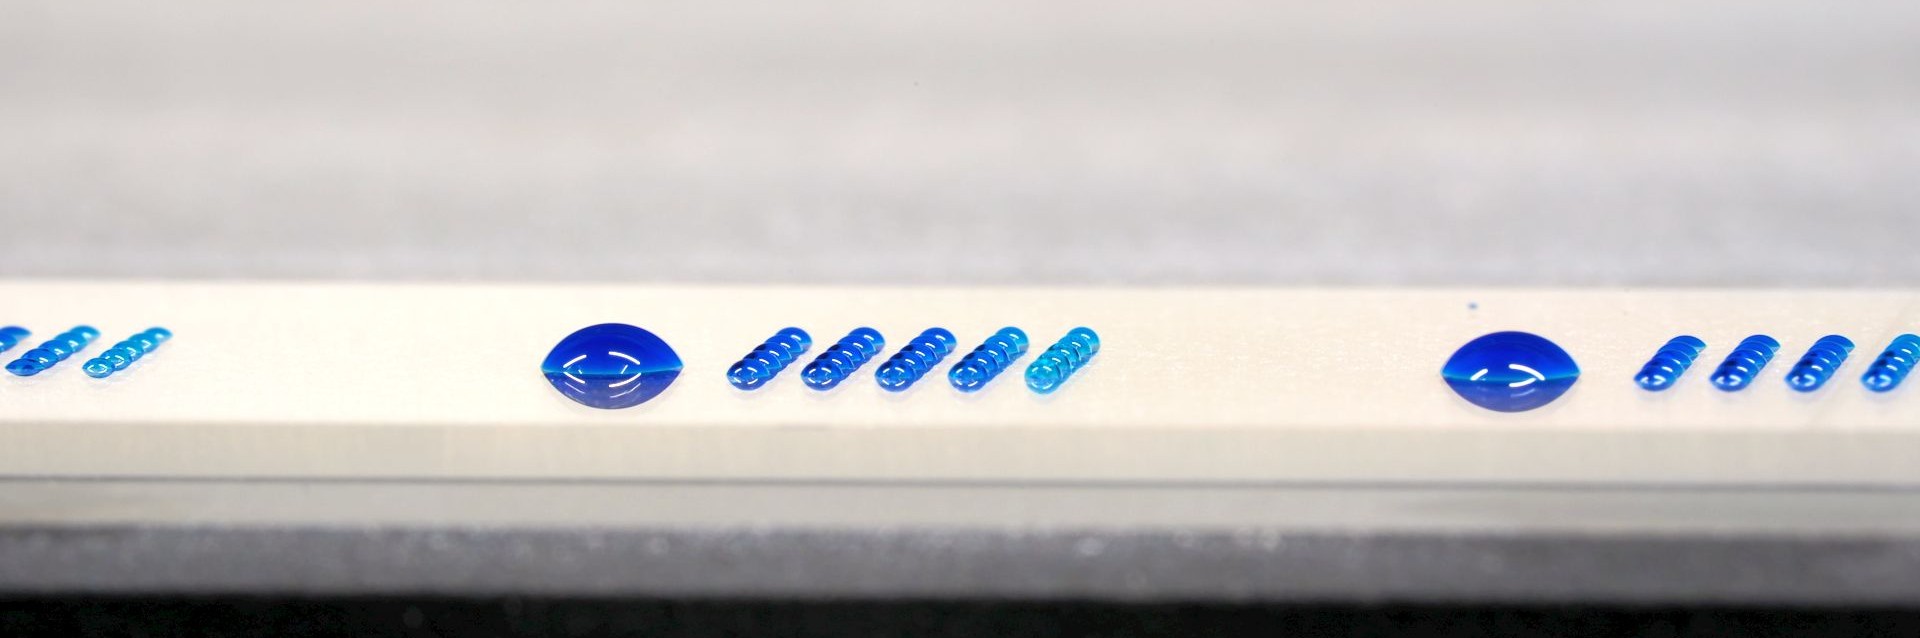 nanoliter microarray next to microliter droplets on a microscope slide to show the difference in size